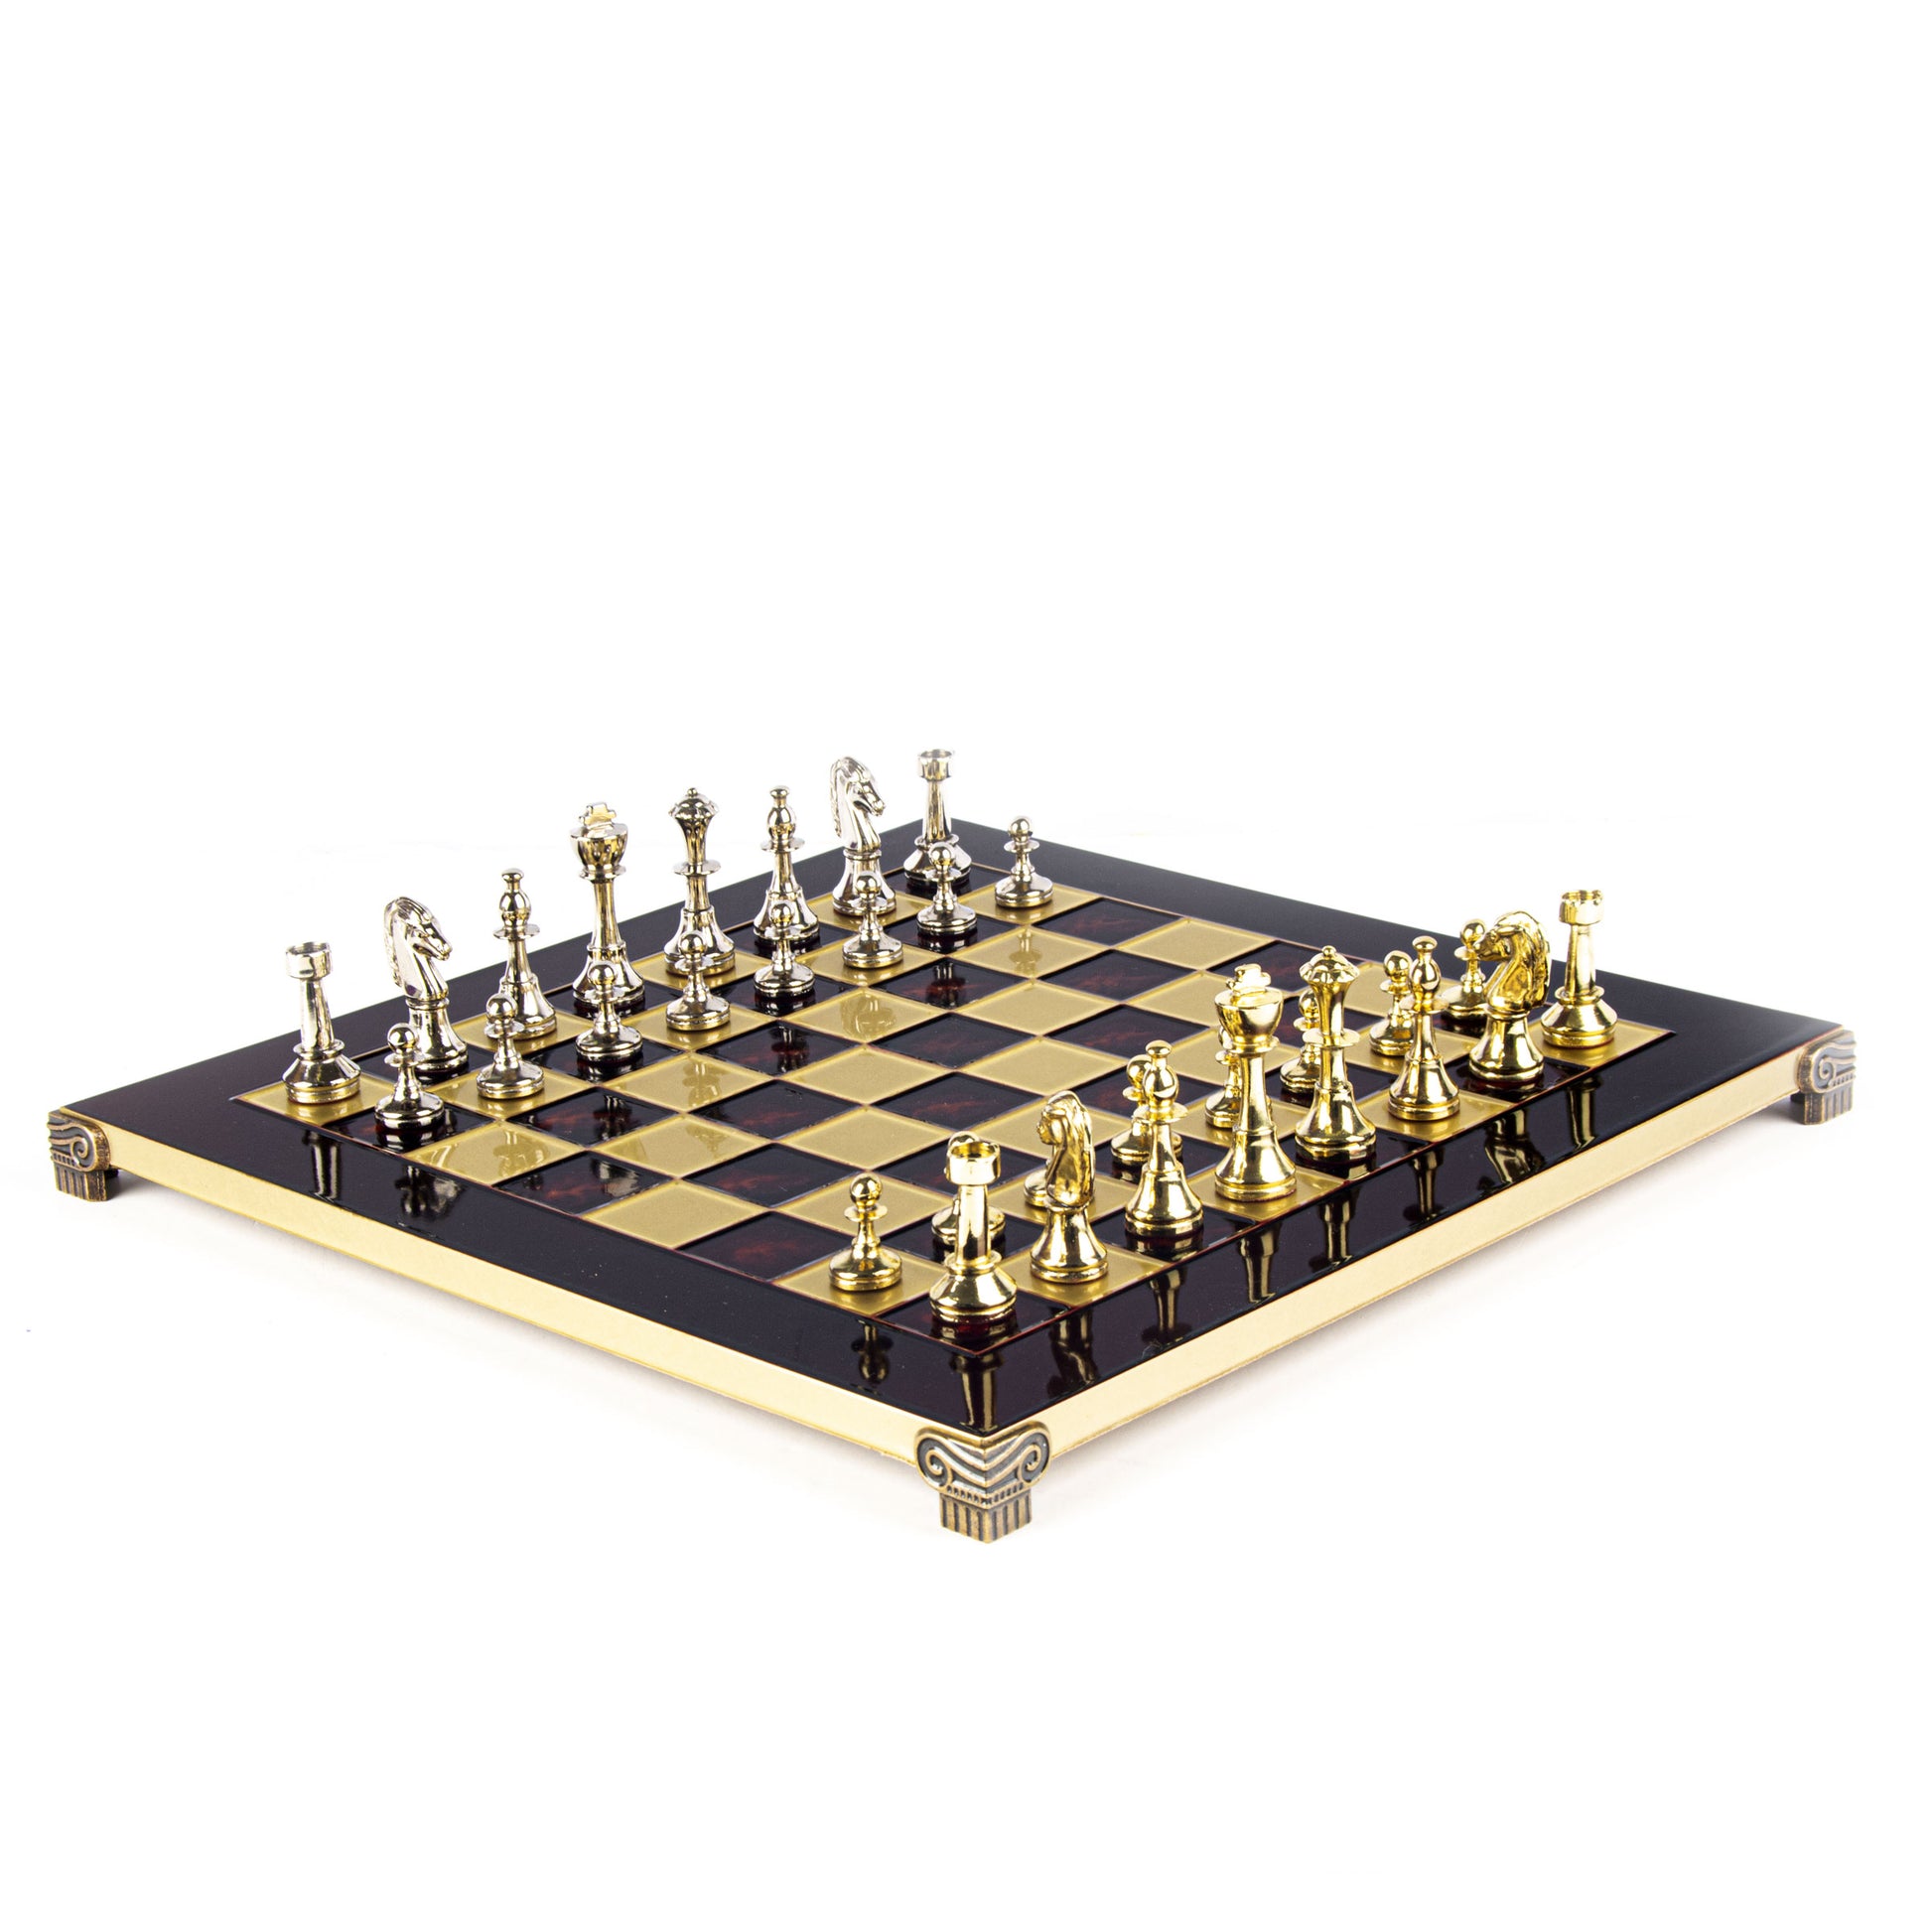 CLASSIC METAL STAUNTON CHESS SET with gold/silver chessmen and bronze chessboard 36 x 36cm (Medium) - Premium Chess from MANOPOULOS Chess & Backgammon - Just €210! Shop now at MANOPOULOS Chess & Backgammon